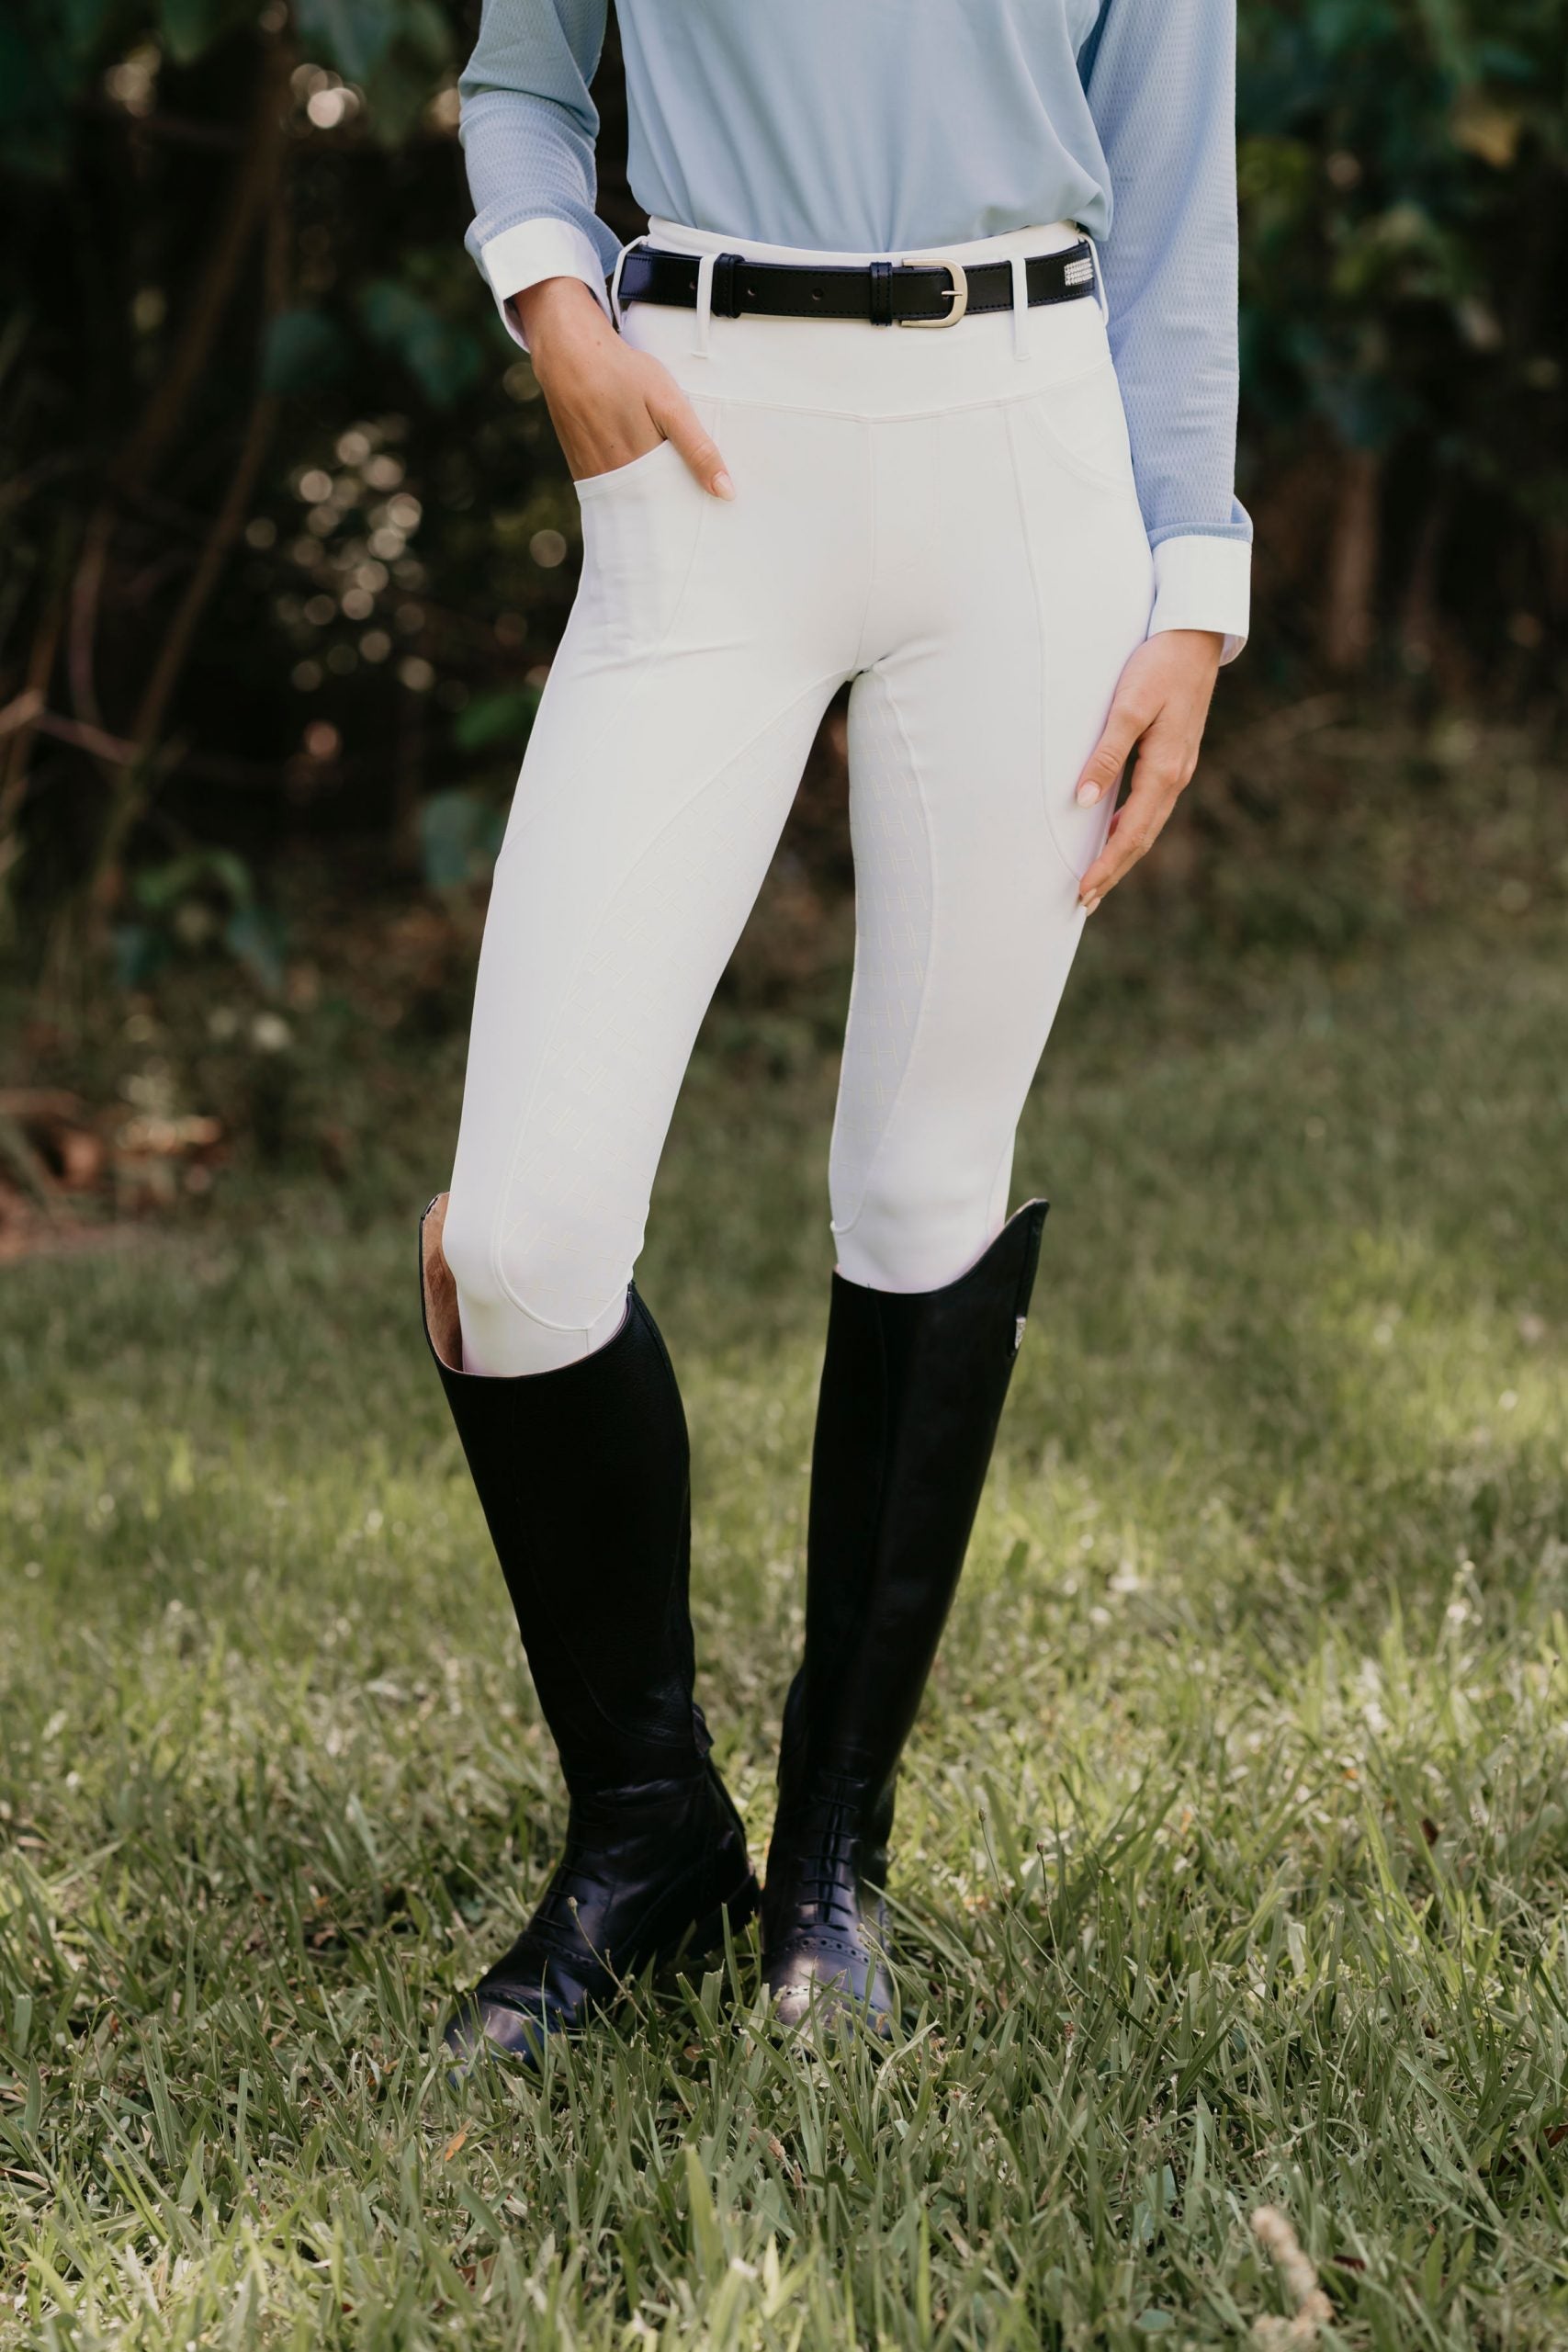 Ladies white competition Tights